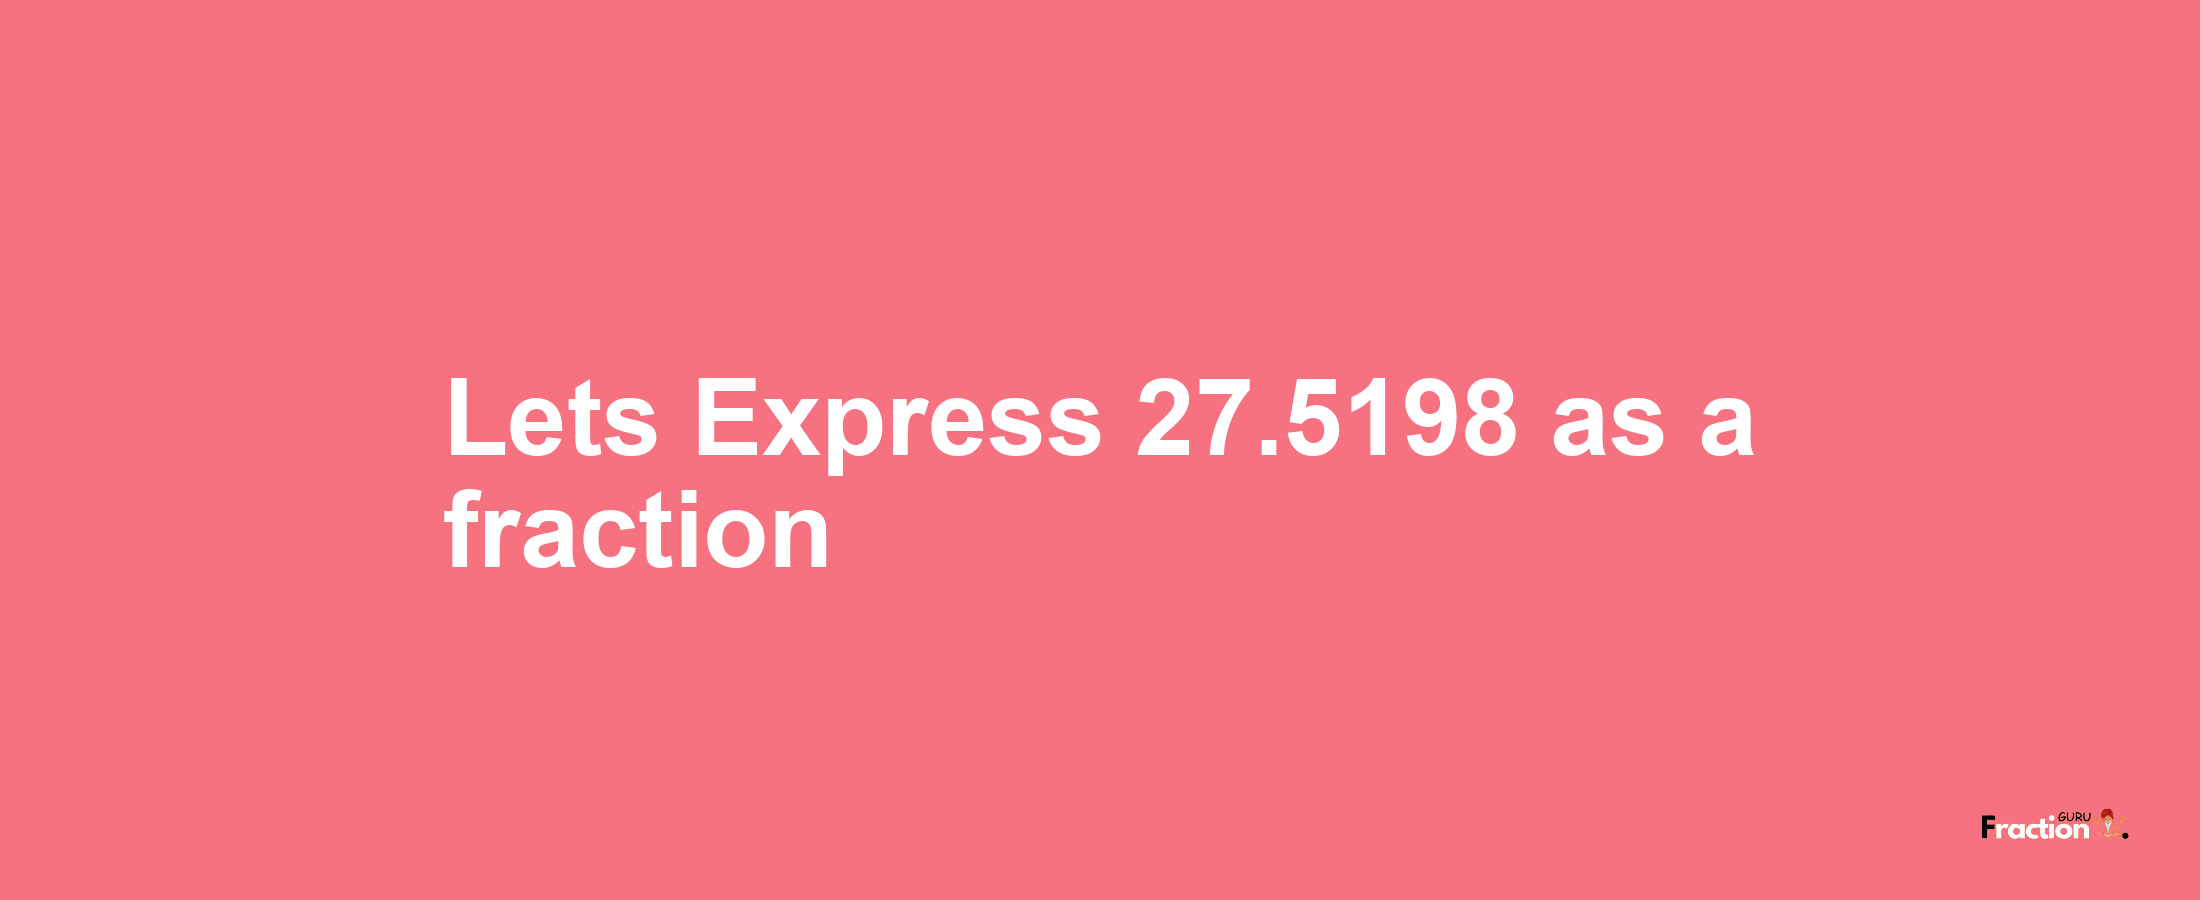 Lets Express 27.5198 as afraction